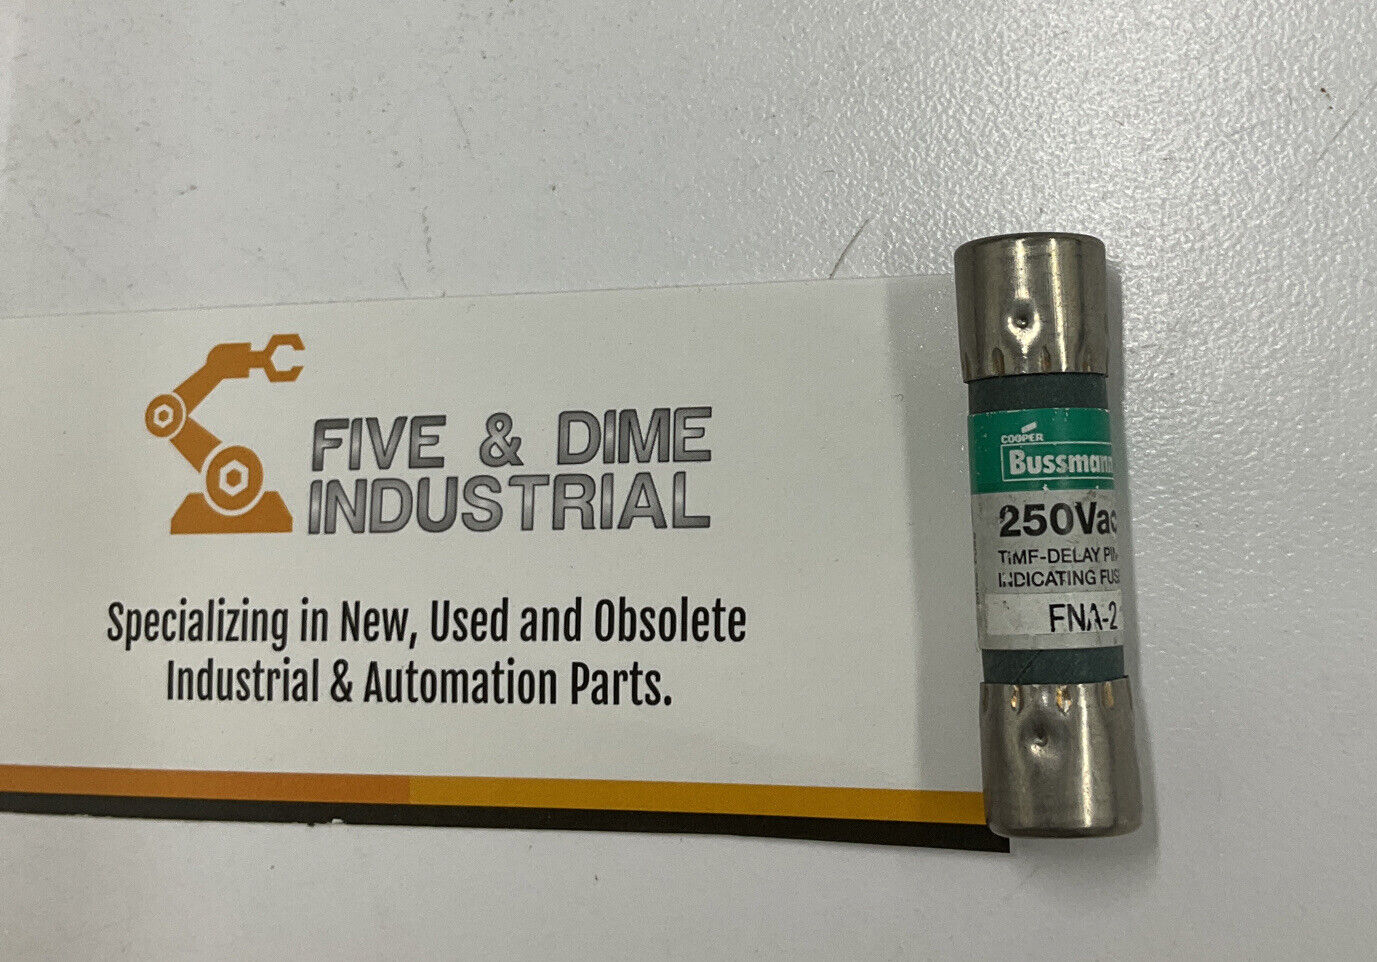 Bussmann FNA-2 Lot of 2 Time Delay Indicating Fuses 250VAC (YE131) - 0